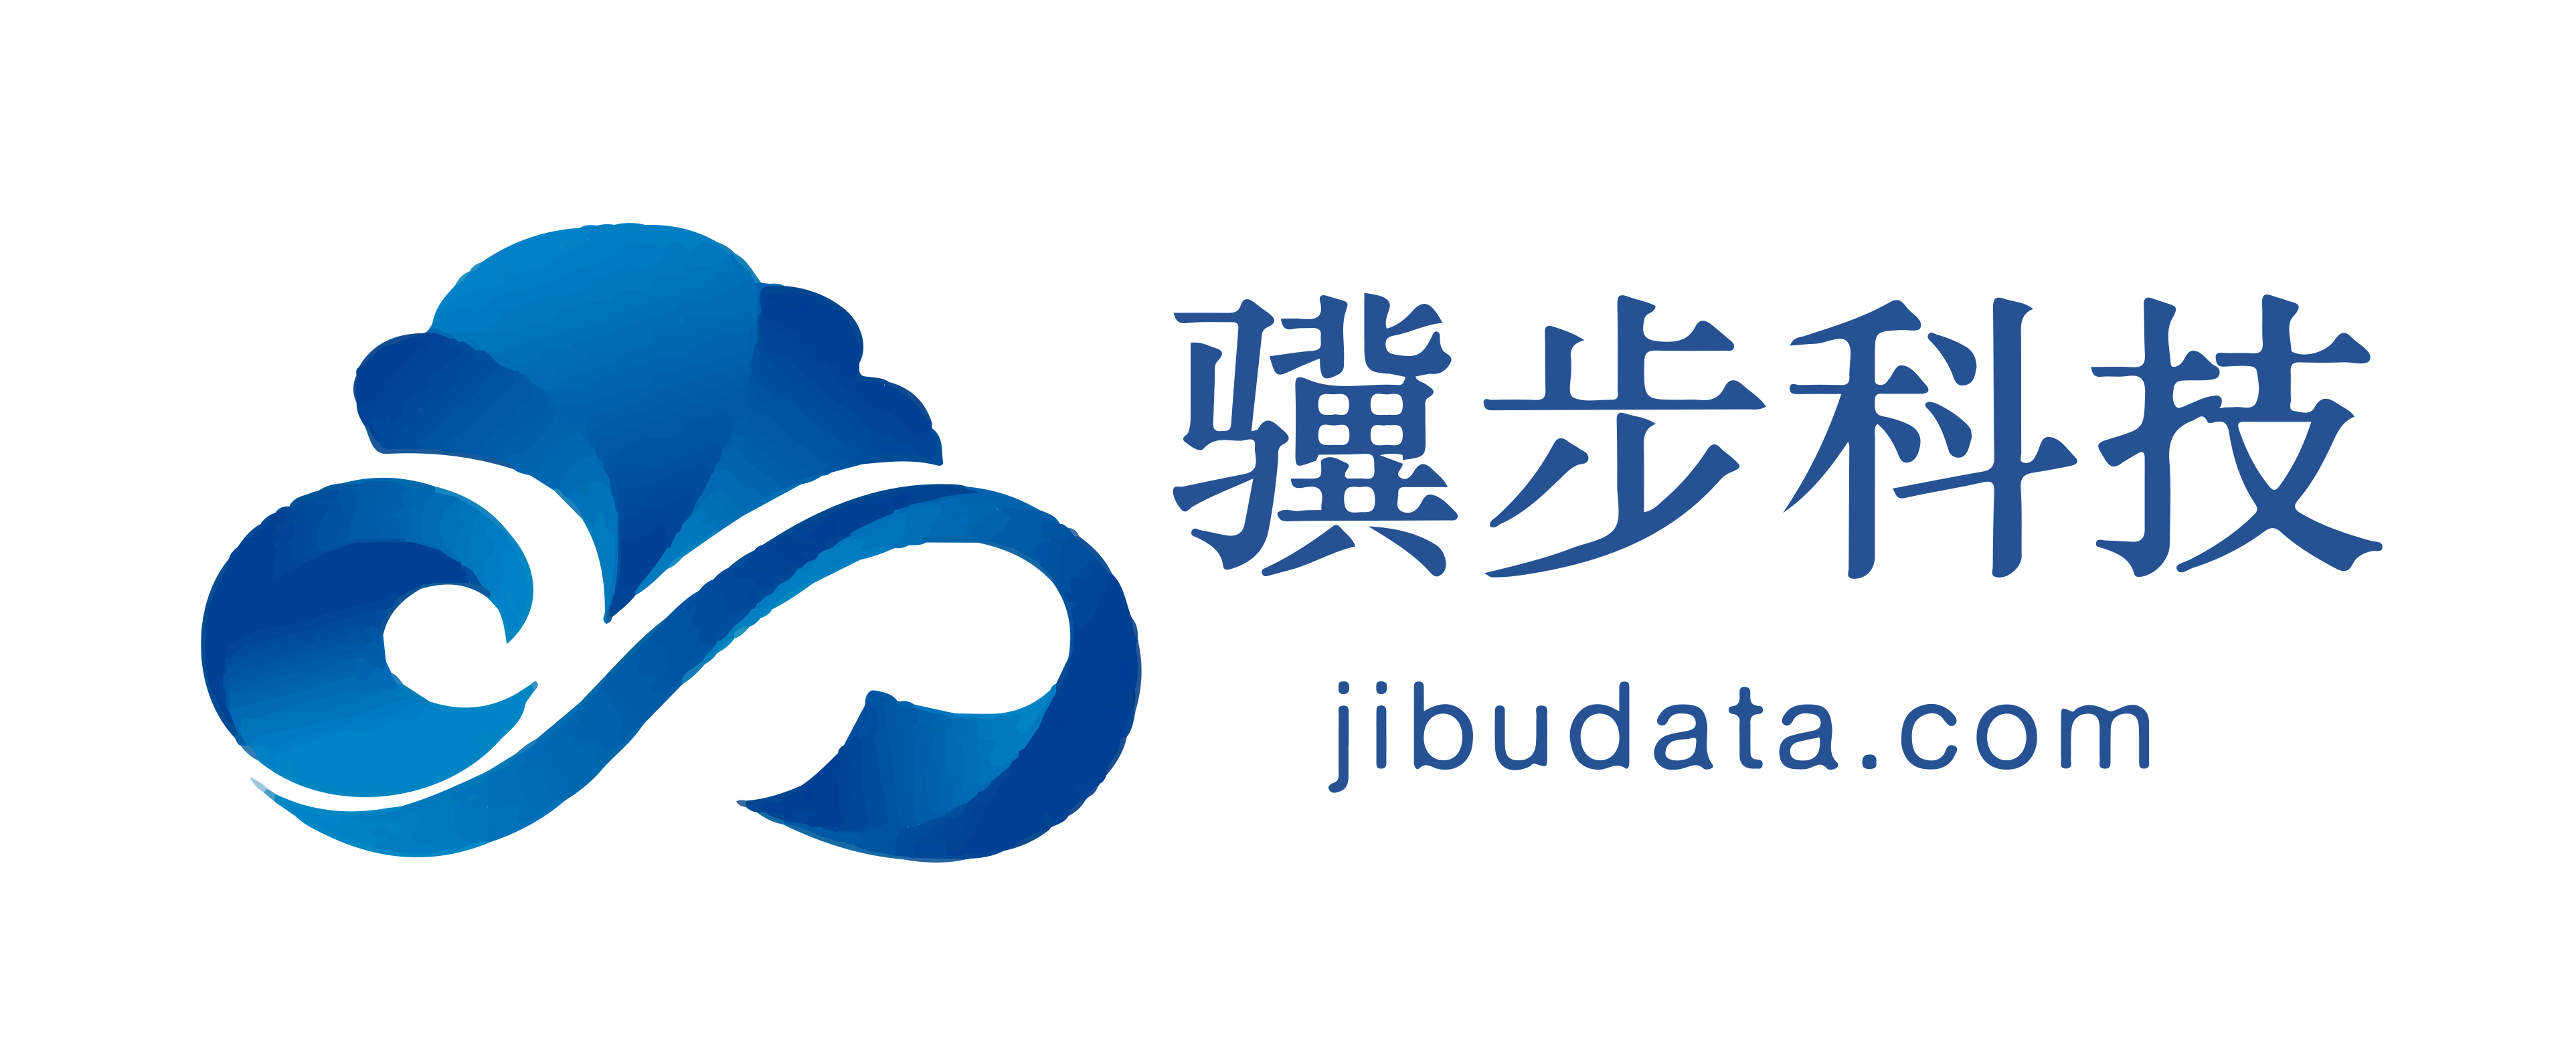 Jibu specializes in providing cutting-edge cloud-native data protection products and storage solutions under a multi-cloud architecture for corporate users. We are dedicated to building data infrastructure essential for enterprises' digital and application modernization transformations. Our technical team comprises master's degree holders from renowned domestic universities, originating from IBM's core R&D team in cloud-native storage. With over a decade of profound expertise in enterprise-level storage development and years of deep exploration and practical experience in cloud-native storage, backup, and disaster recovery fields, we are poised to lead the way in technological innovation for enterprise storage solutions.